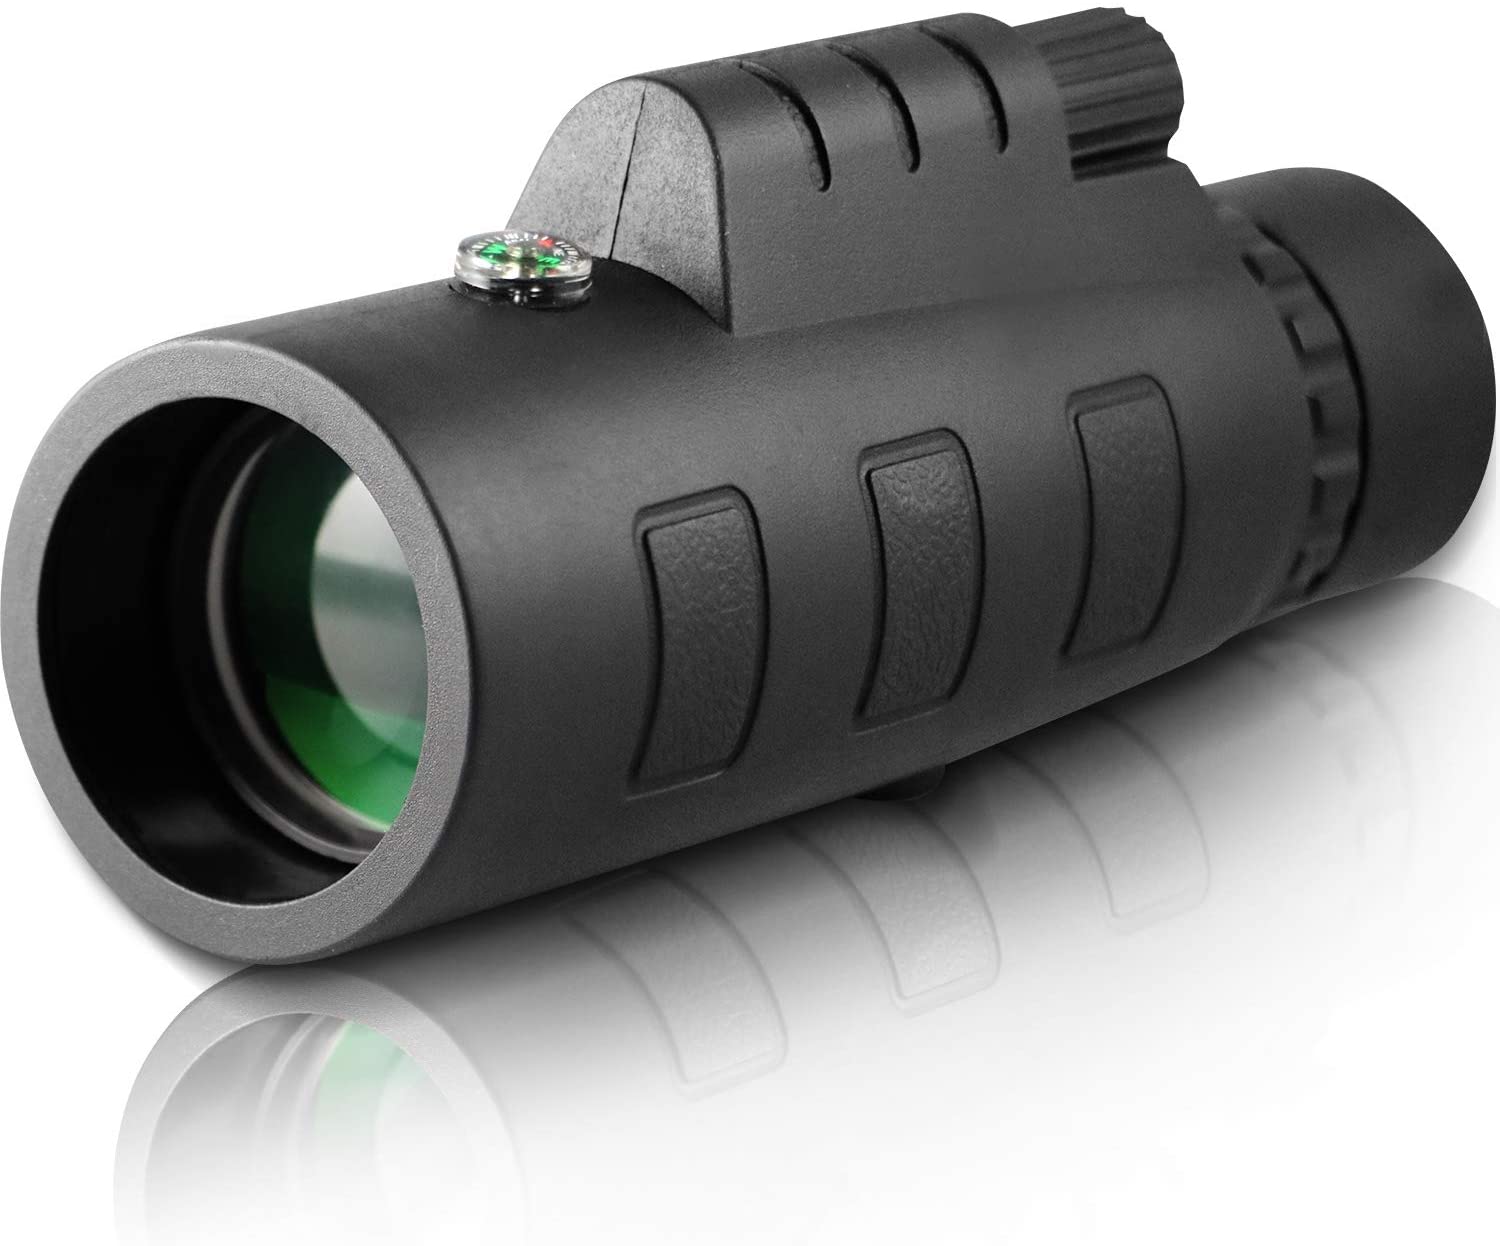 Starscope Monocular Telescope: The Ultimate Scam Or Must-Have Gadget?